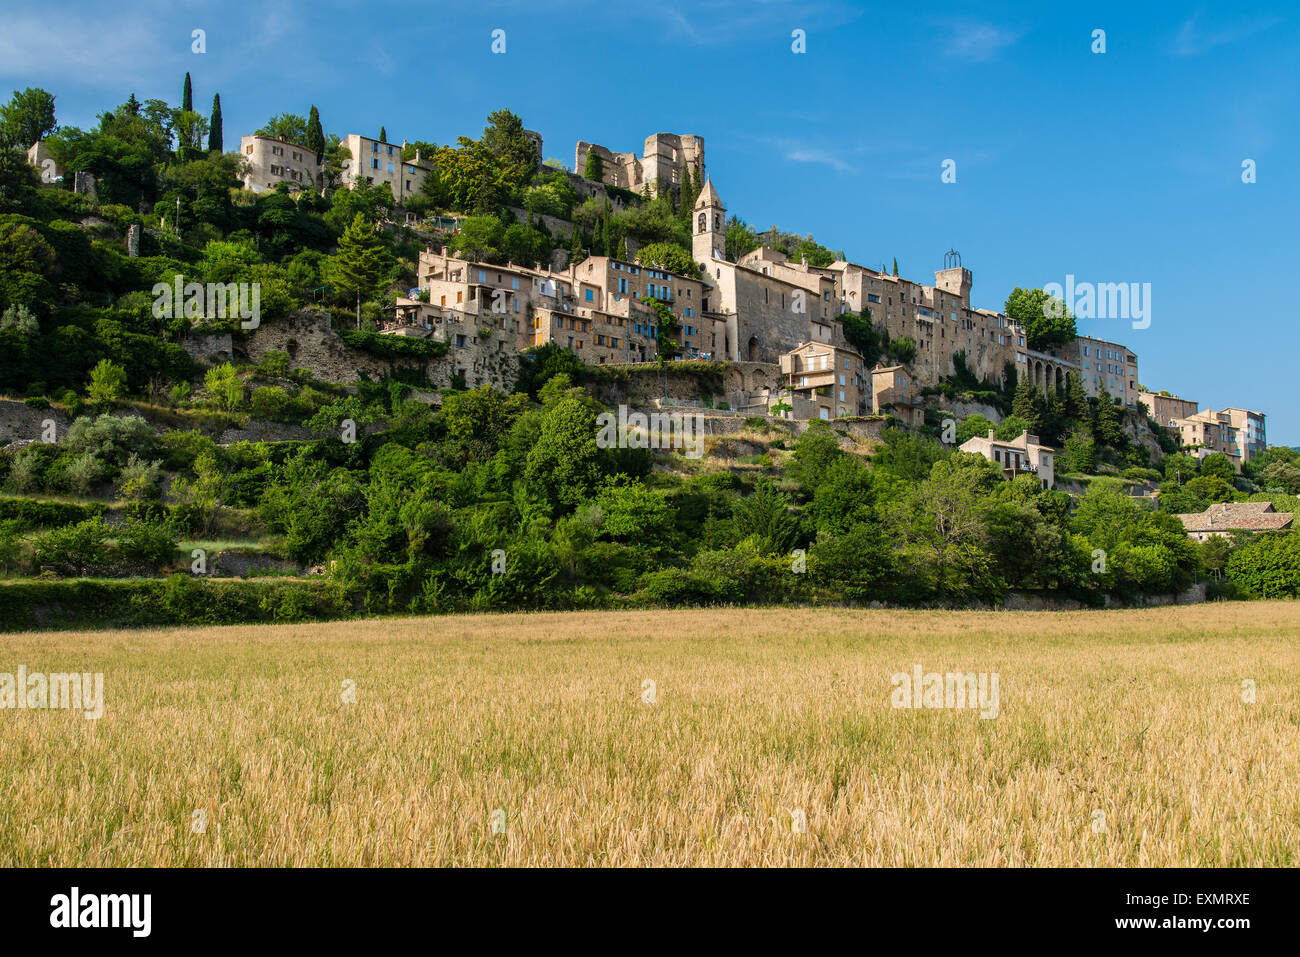 View of the medieval village of Montbrun-les-Bains, Provence, France Stock Photo